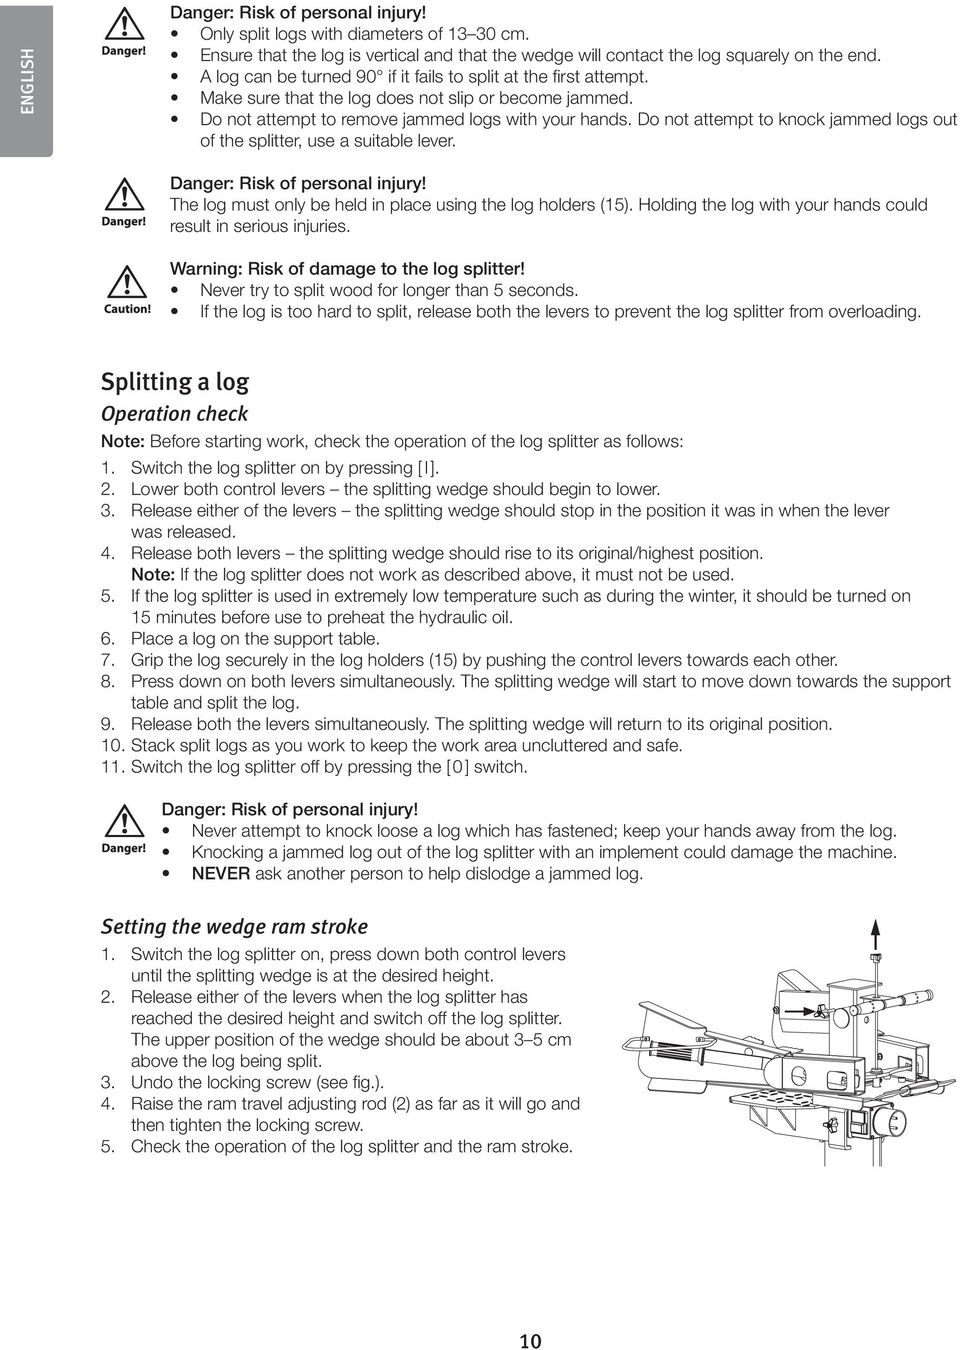 Do not attempt to knock jammed logs out of the splitter, use a suitable lever. Danger: Risk of personal injury! The log must only be held in place using the log holders (15).